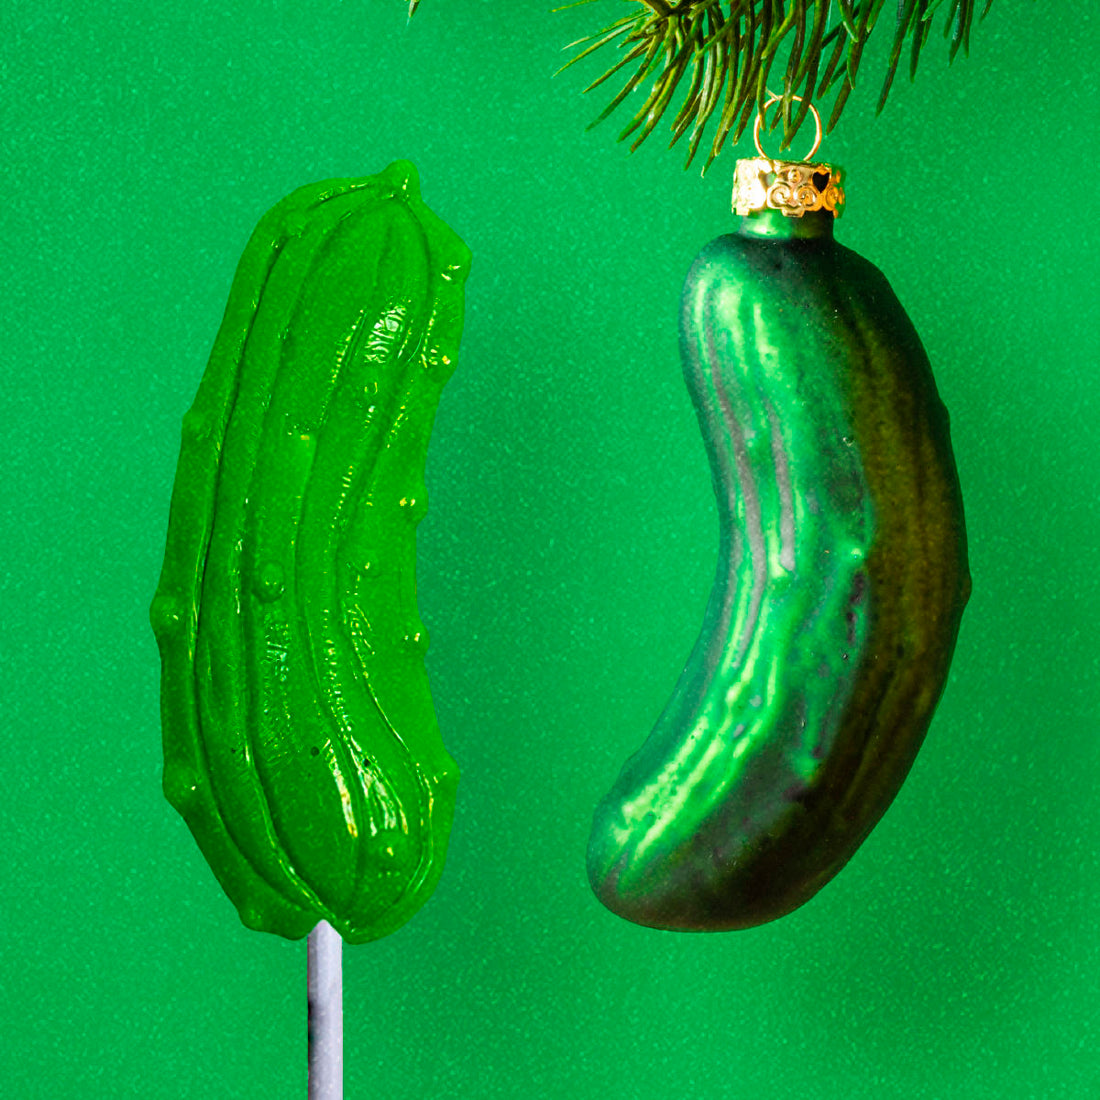 Where Does The Pickle Ornament Come From?